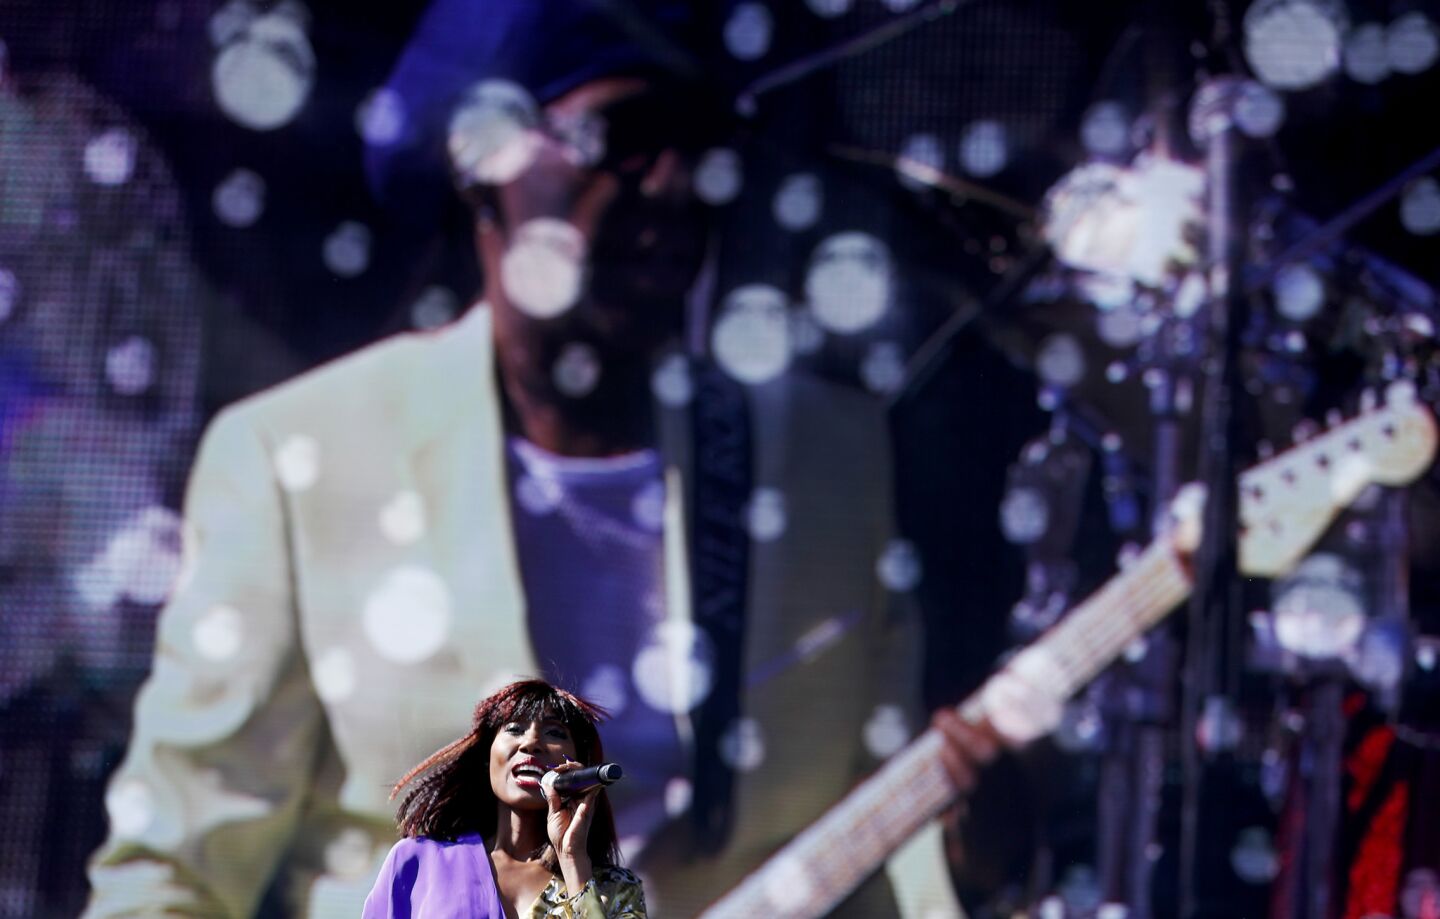 Singer Folami performs with Nile Rodgers, background, during the Coachella Music and Arts Festival in Indio on, April 14.